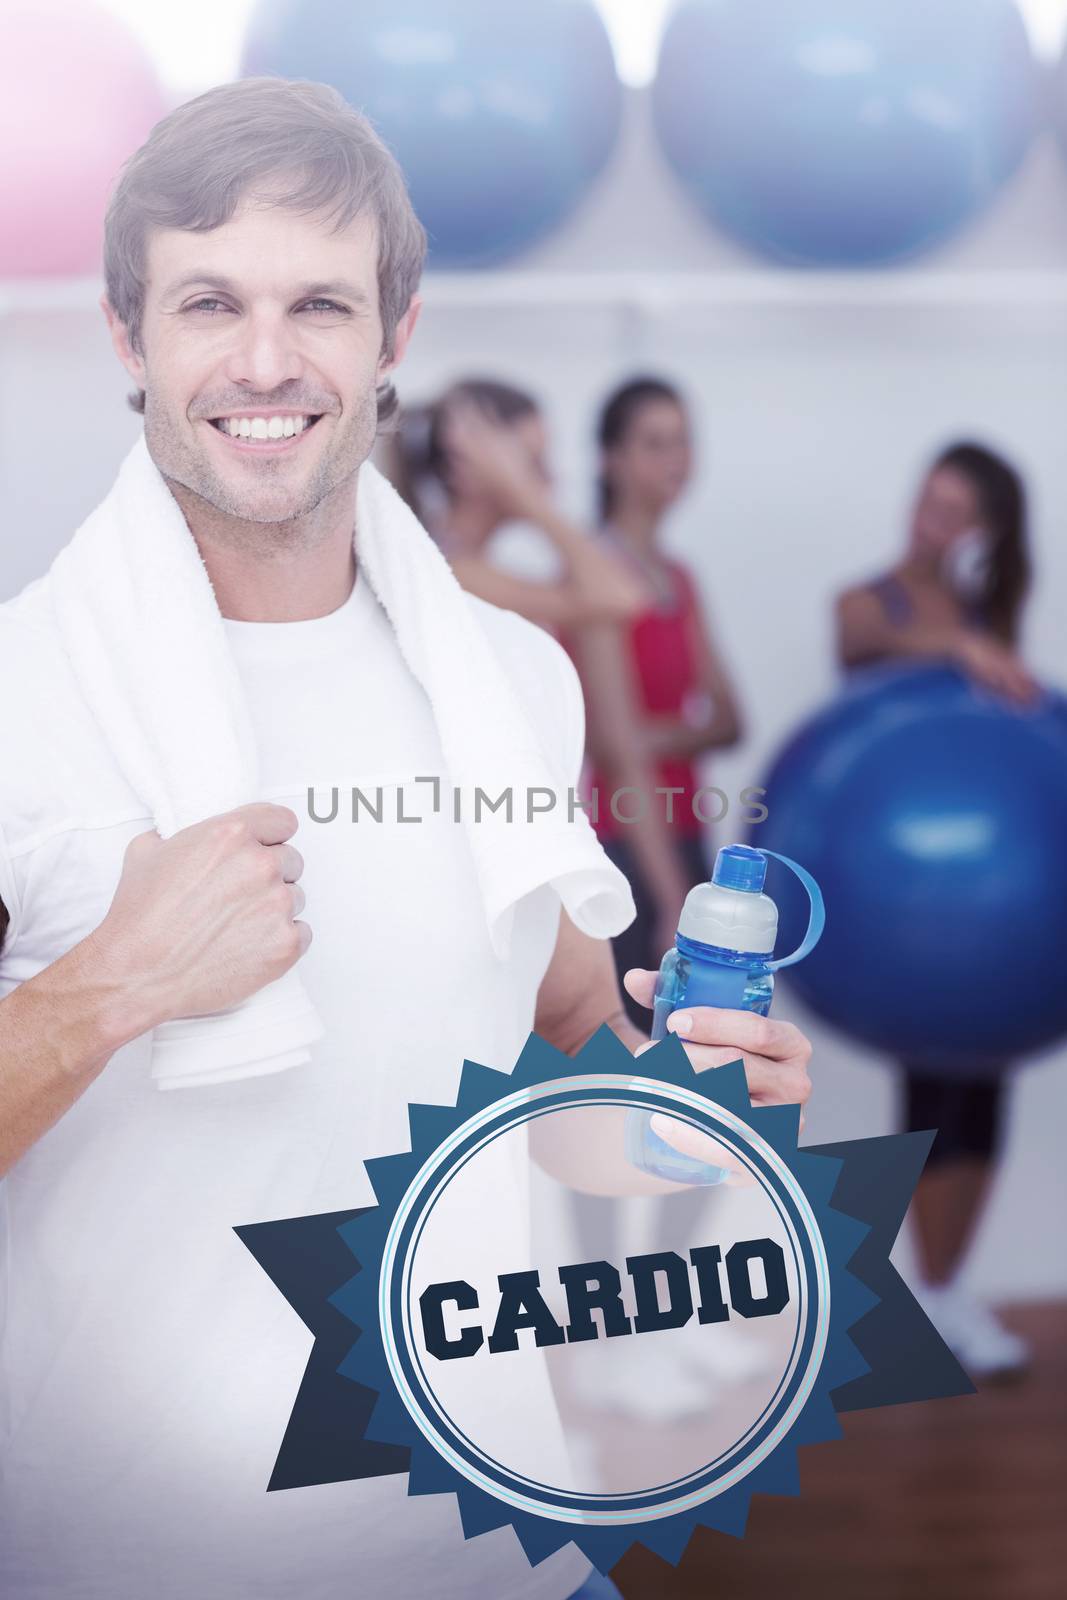 The word cardio and man holding water bottle with friends in background at fitness studio against badge